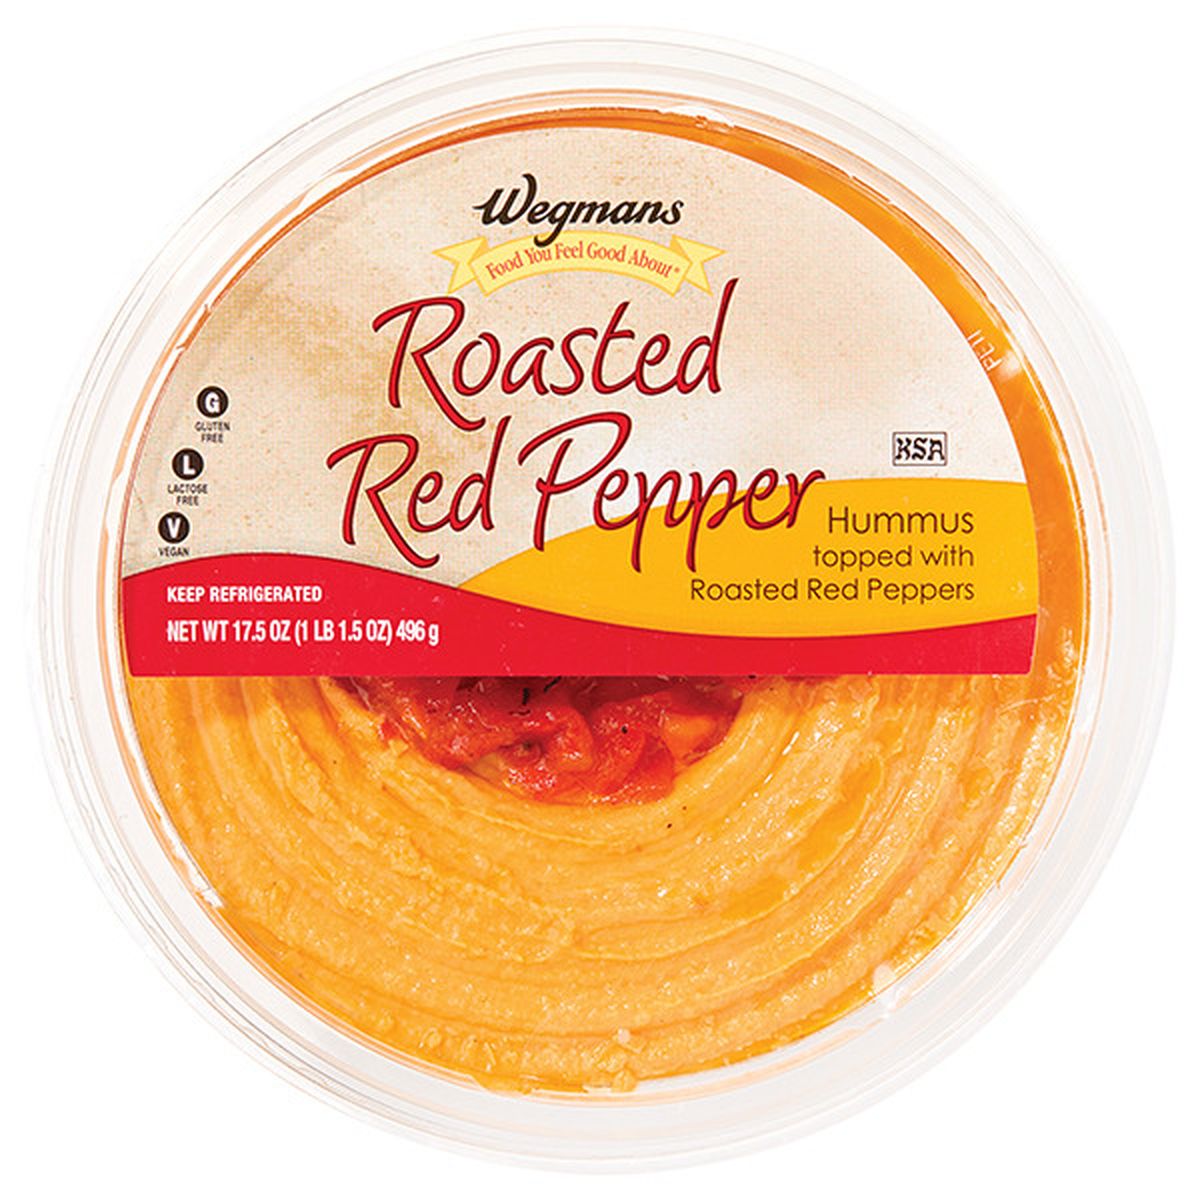 Calories in Wegmans Roasted Red Pepper Hummus Topped with Roasted Red Peppers, FAMILY PACK